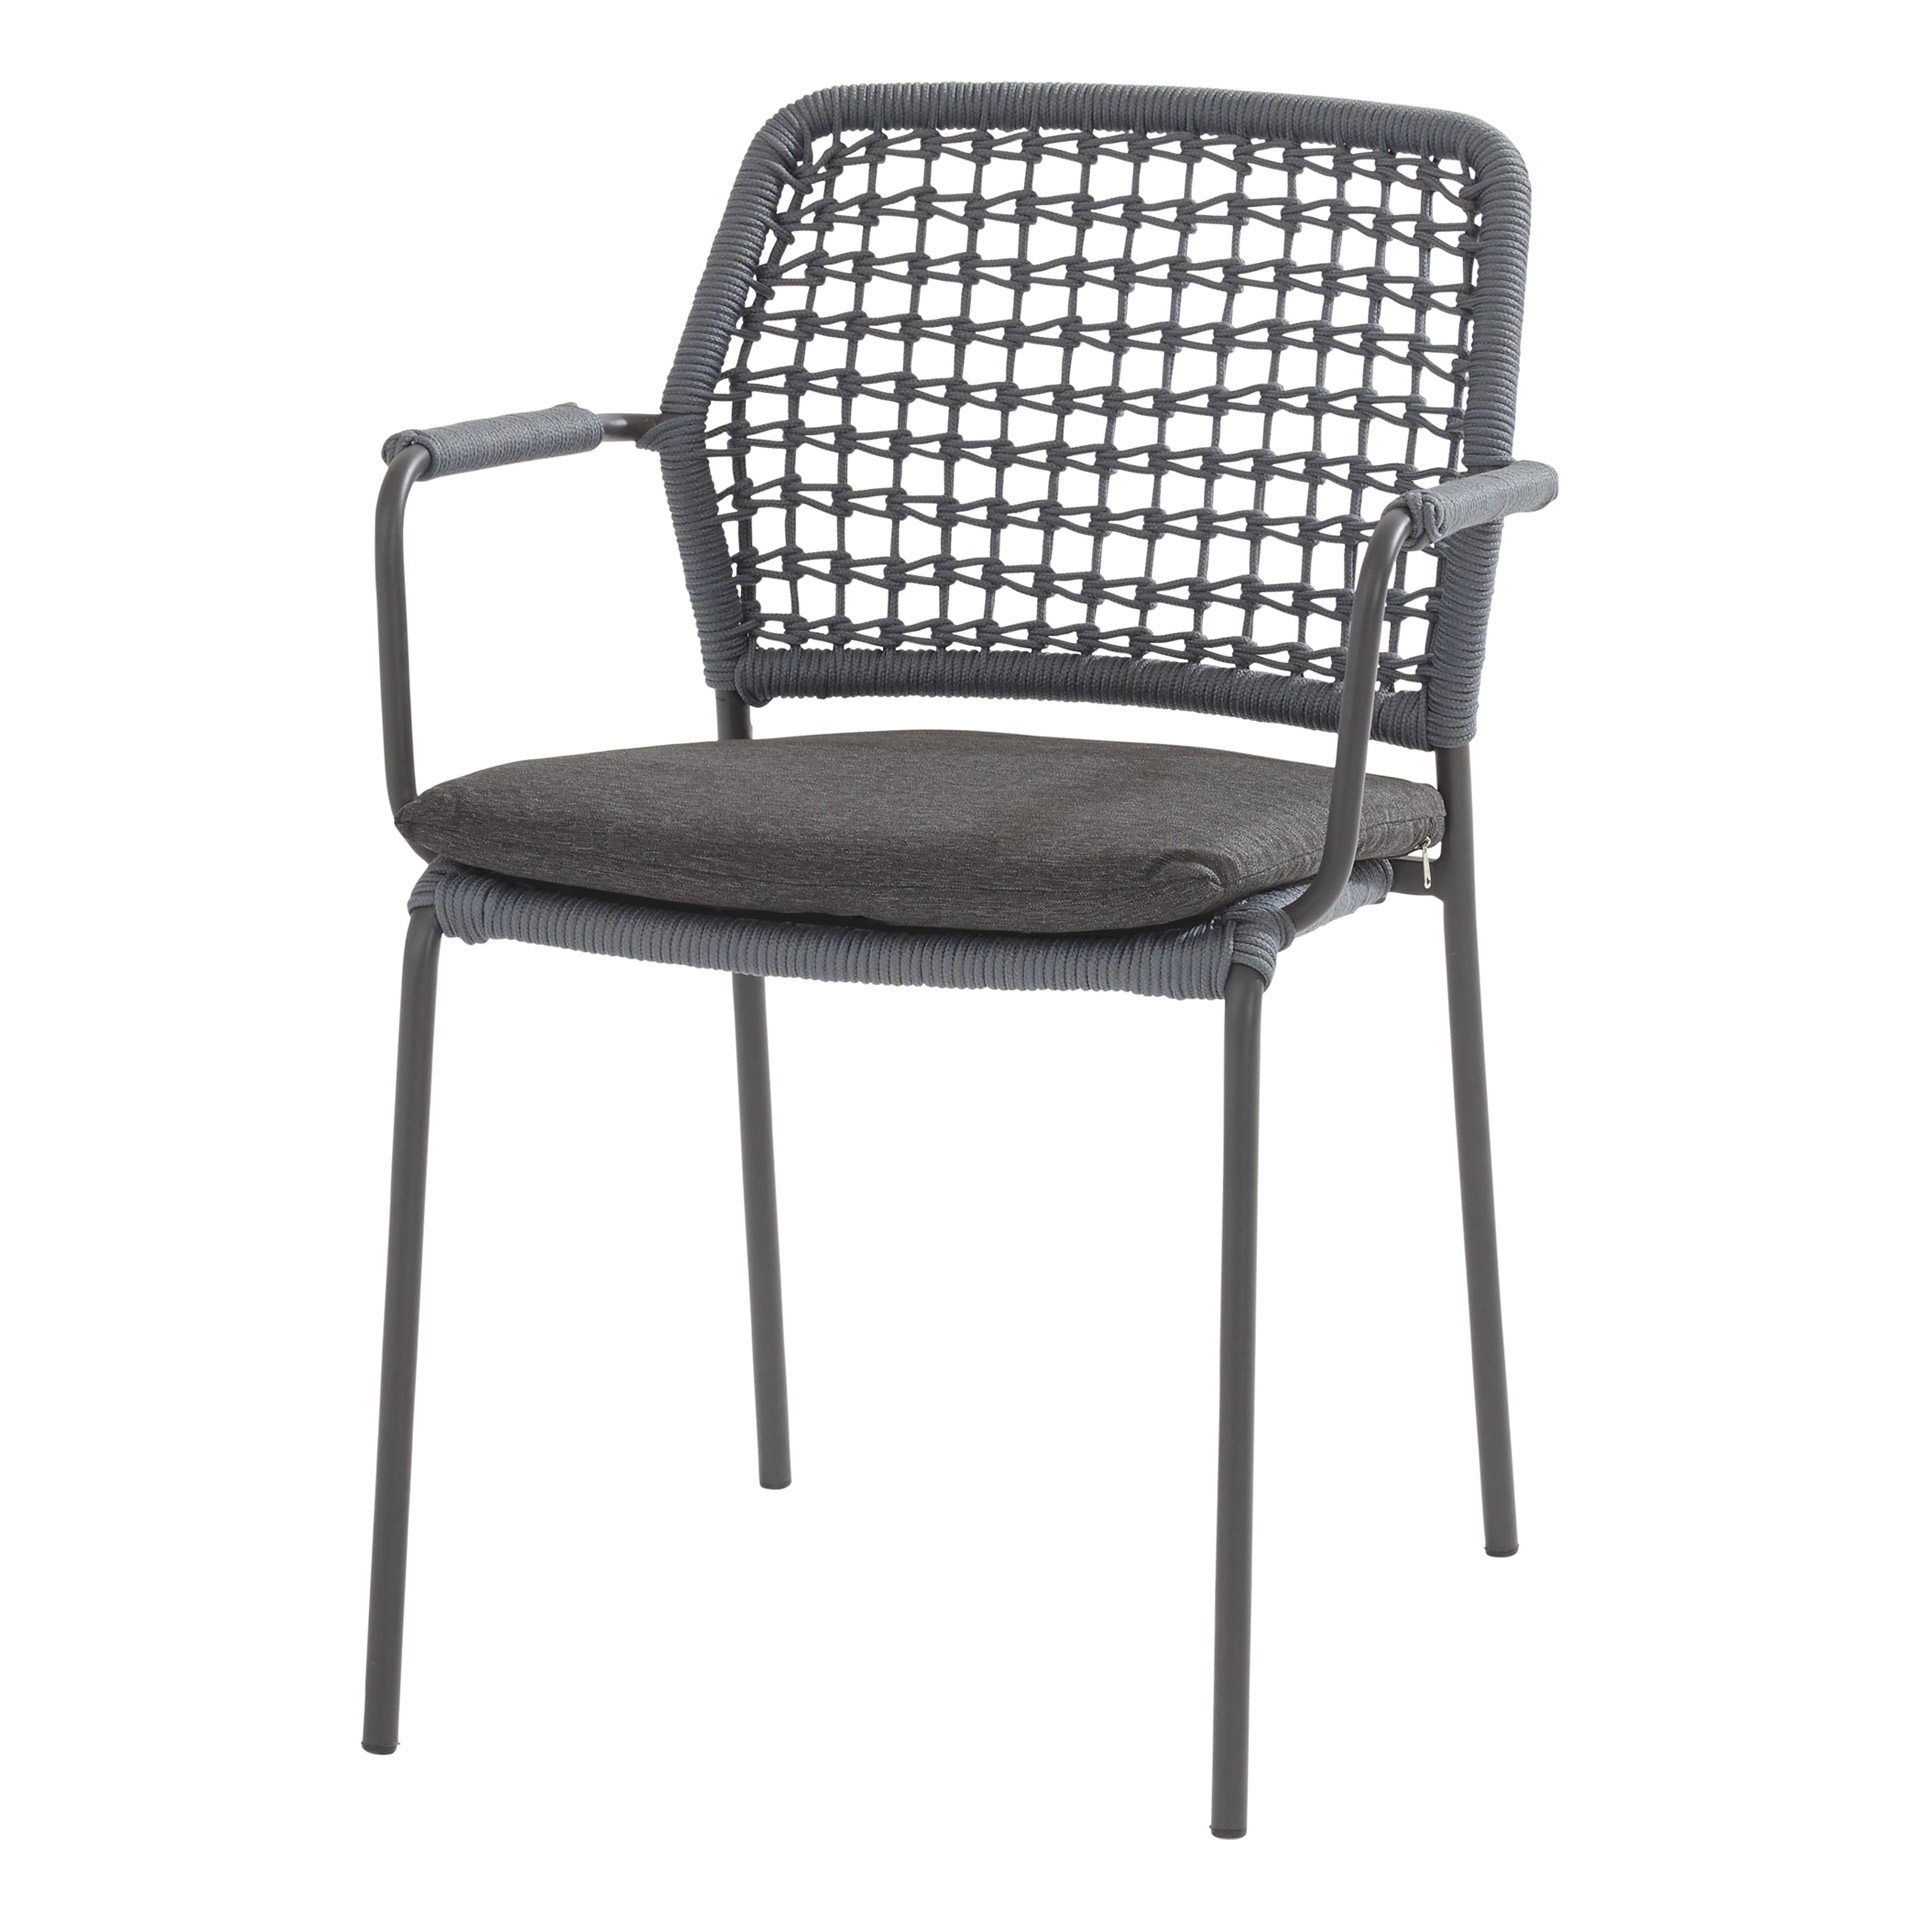 Barista stacking chair Blue with cushion